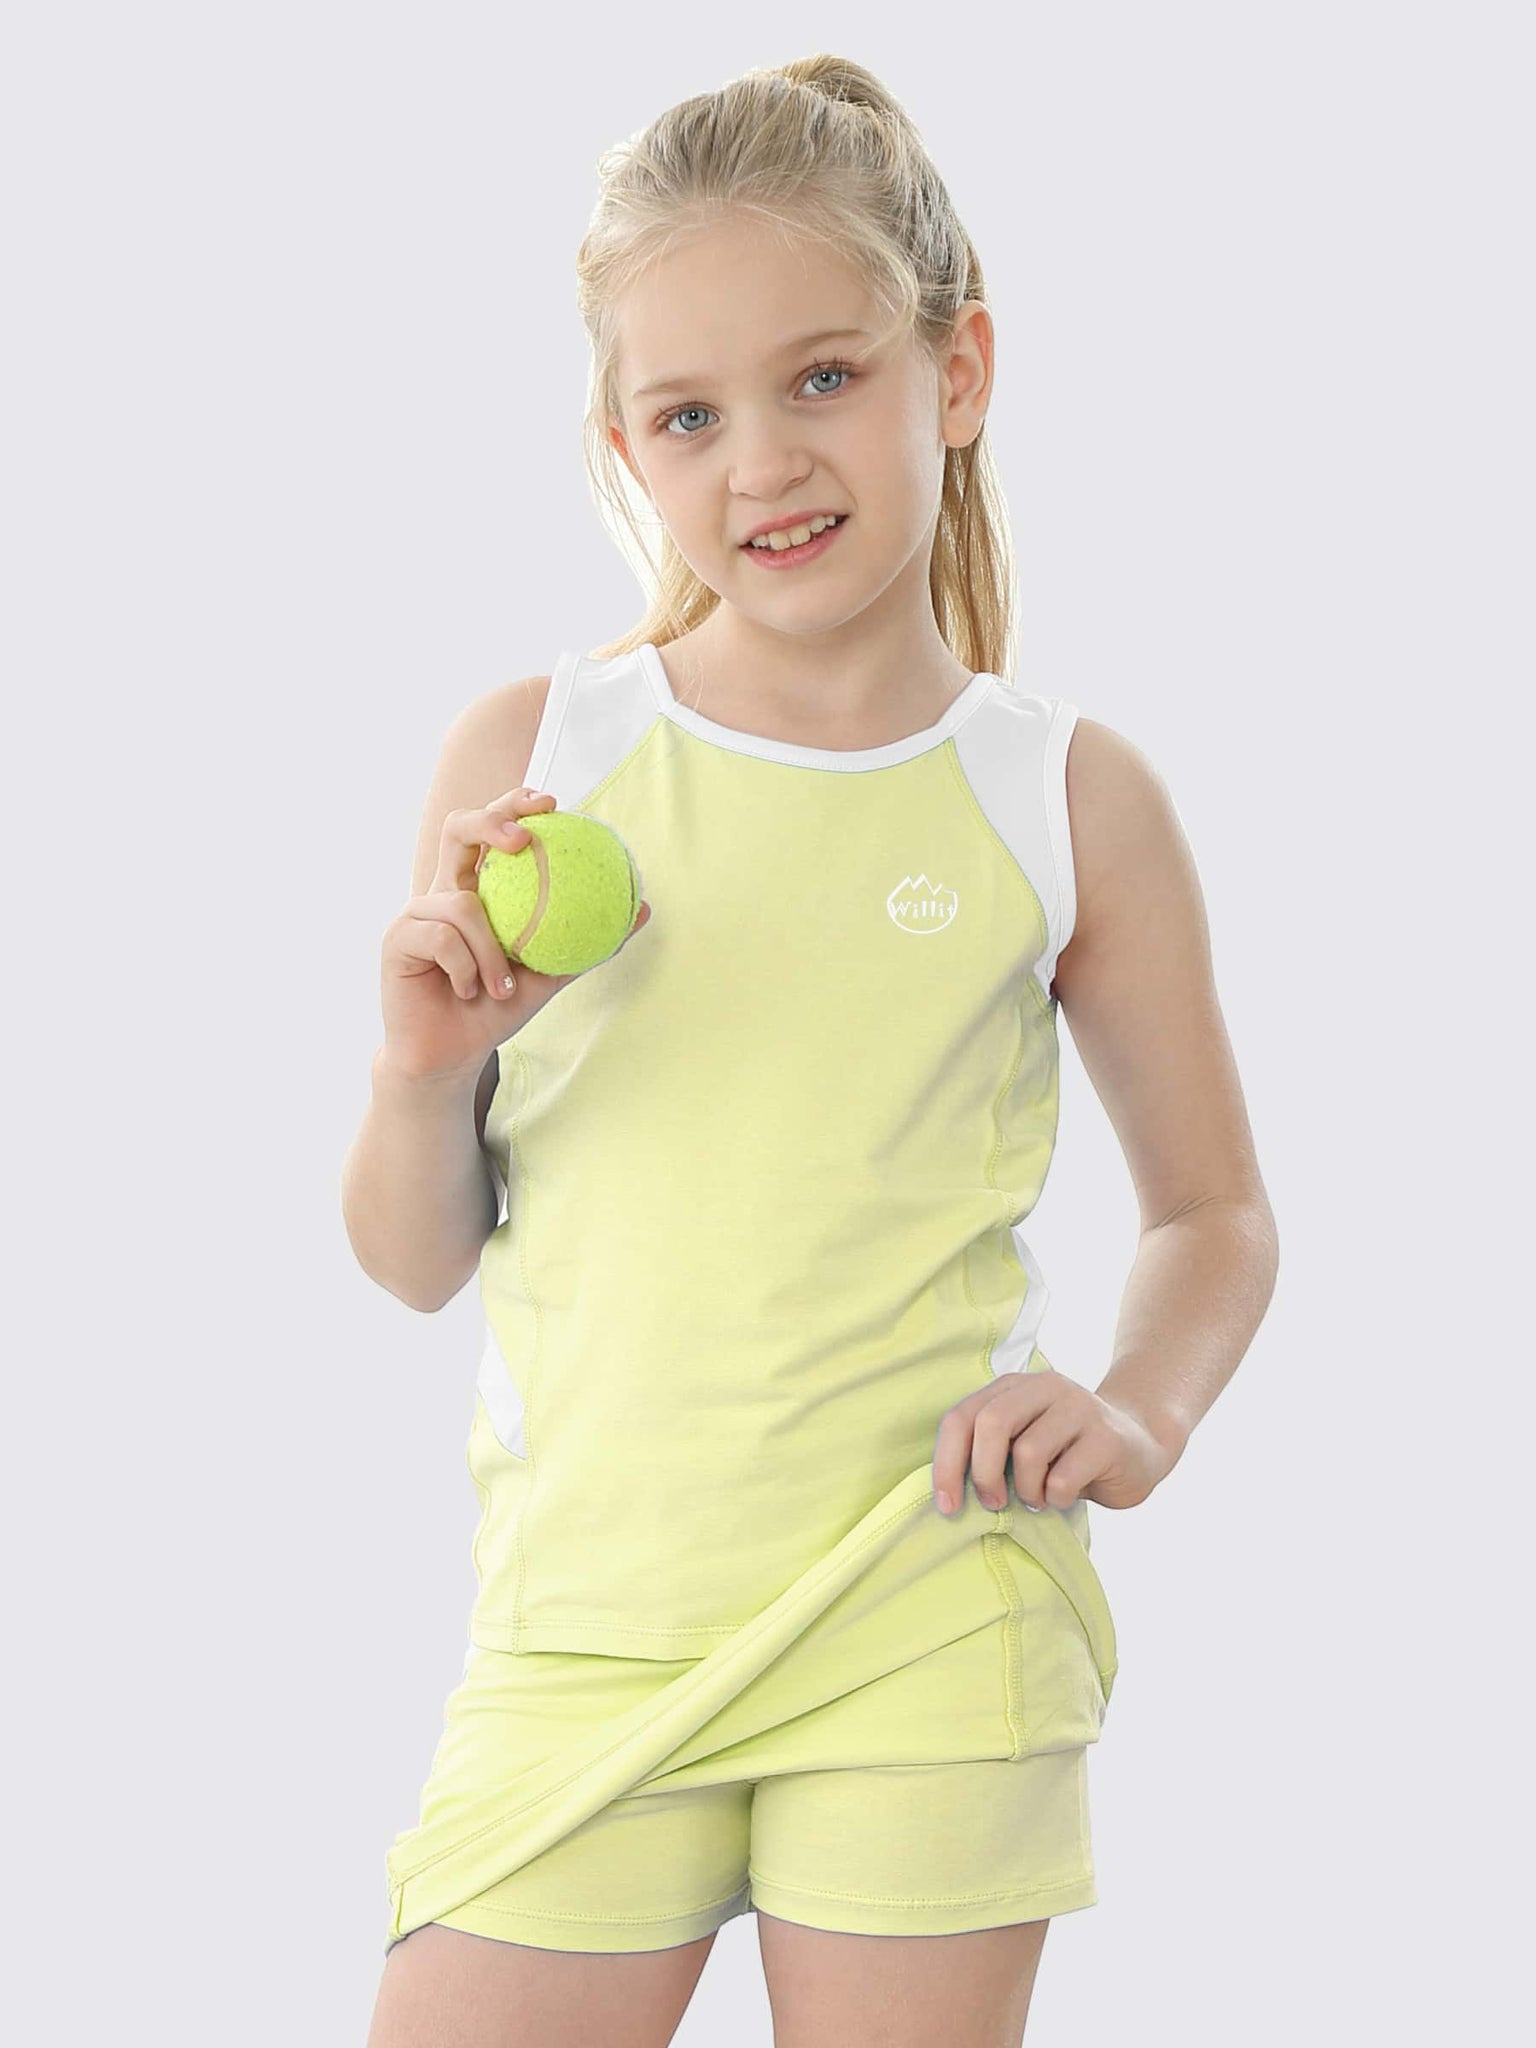 Willit Girls' Tennis Outfit_Yellow_model4